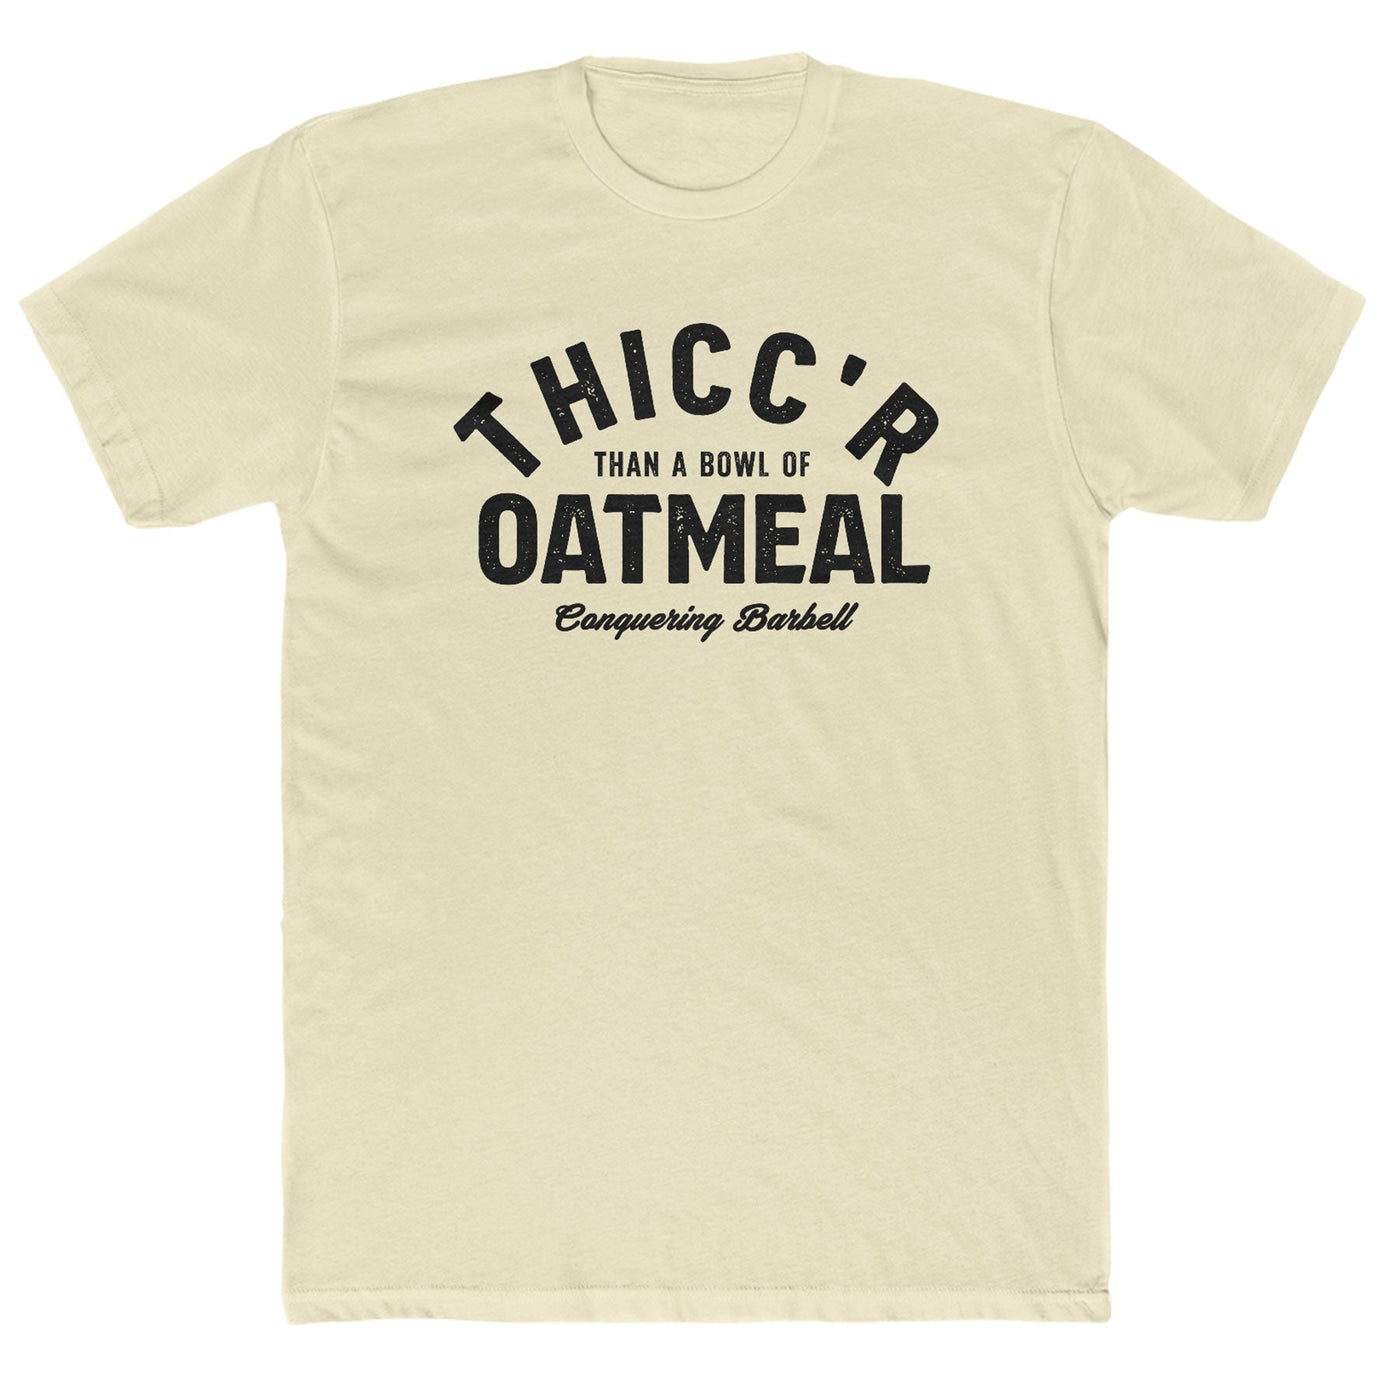 Thicc'r than a bowl of oatmeal - on Natural tee - Conquering Barbell